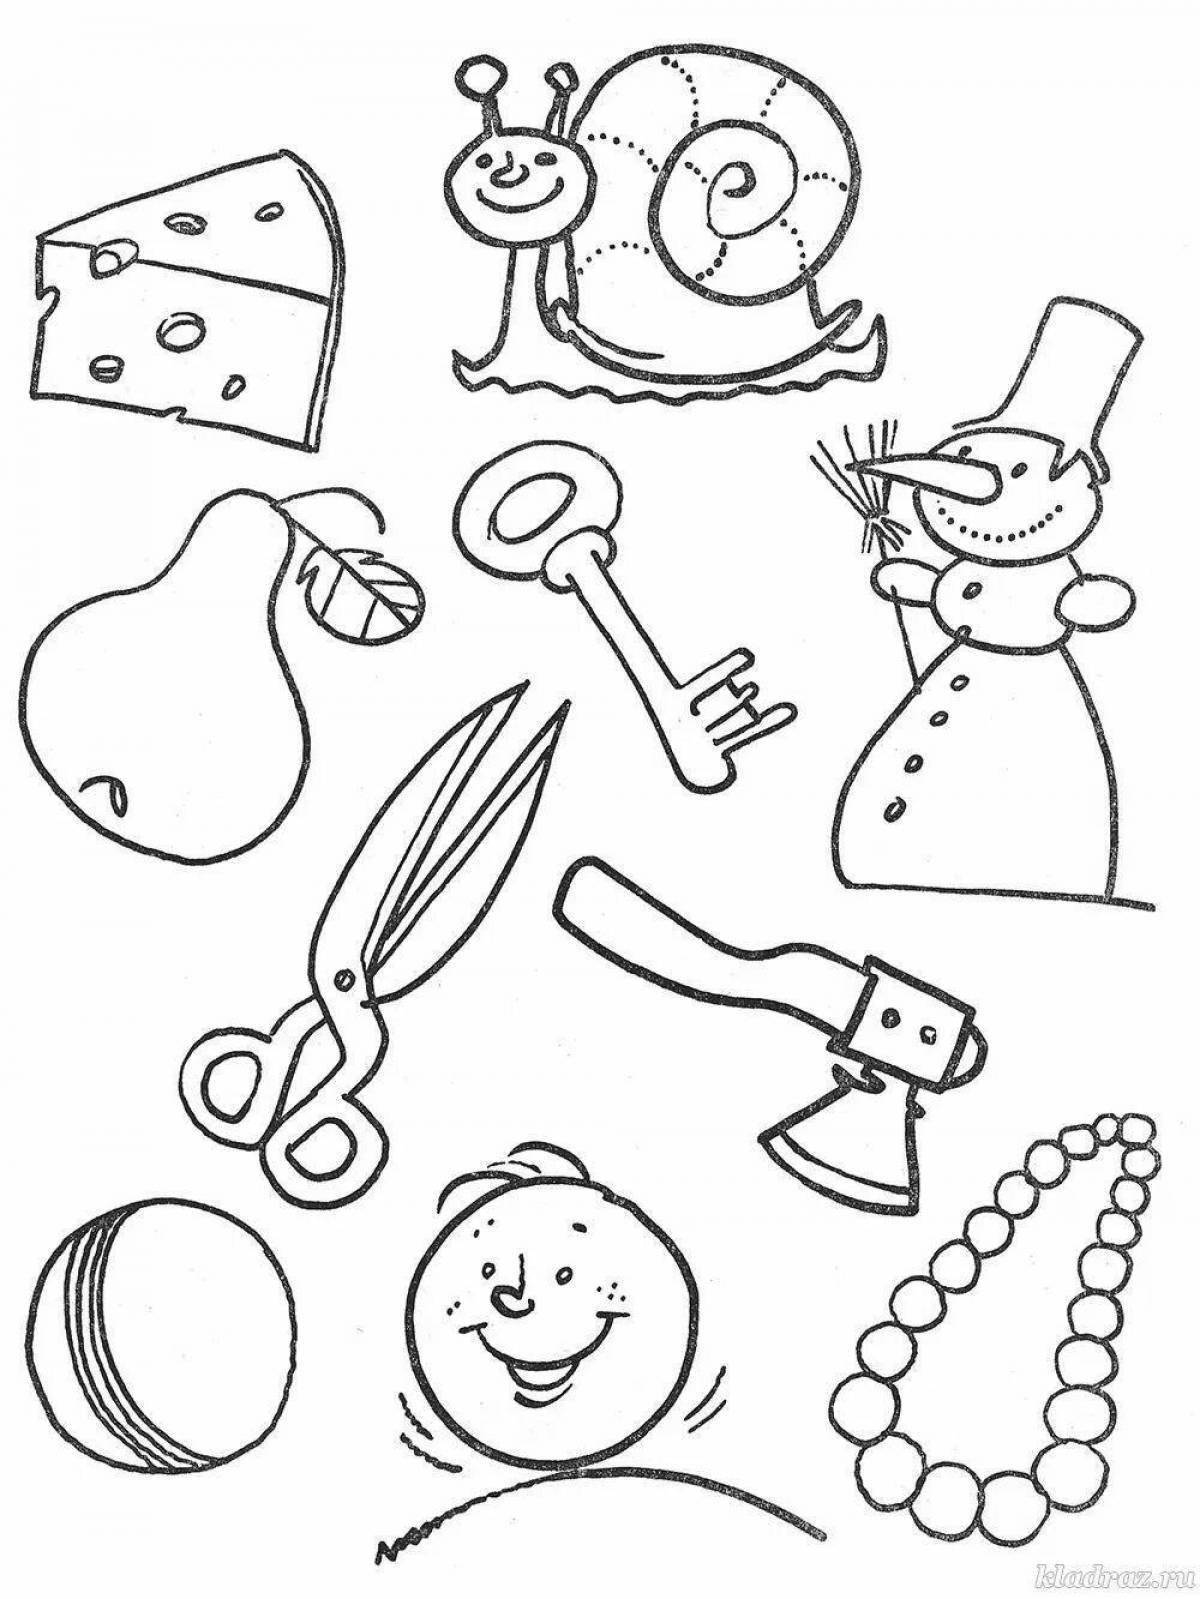 Colourful coloring pages for little dreamers